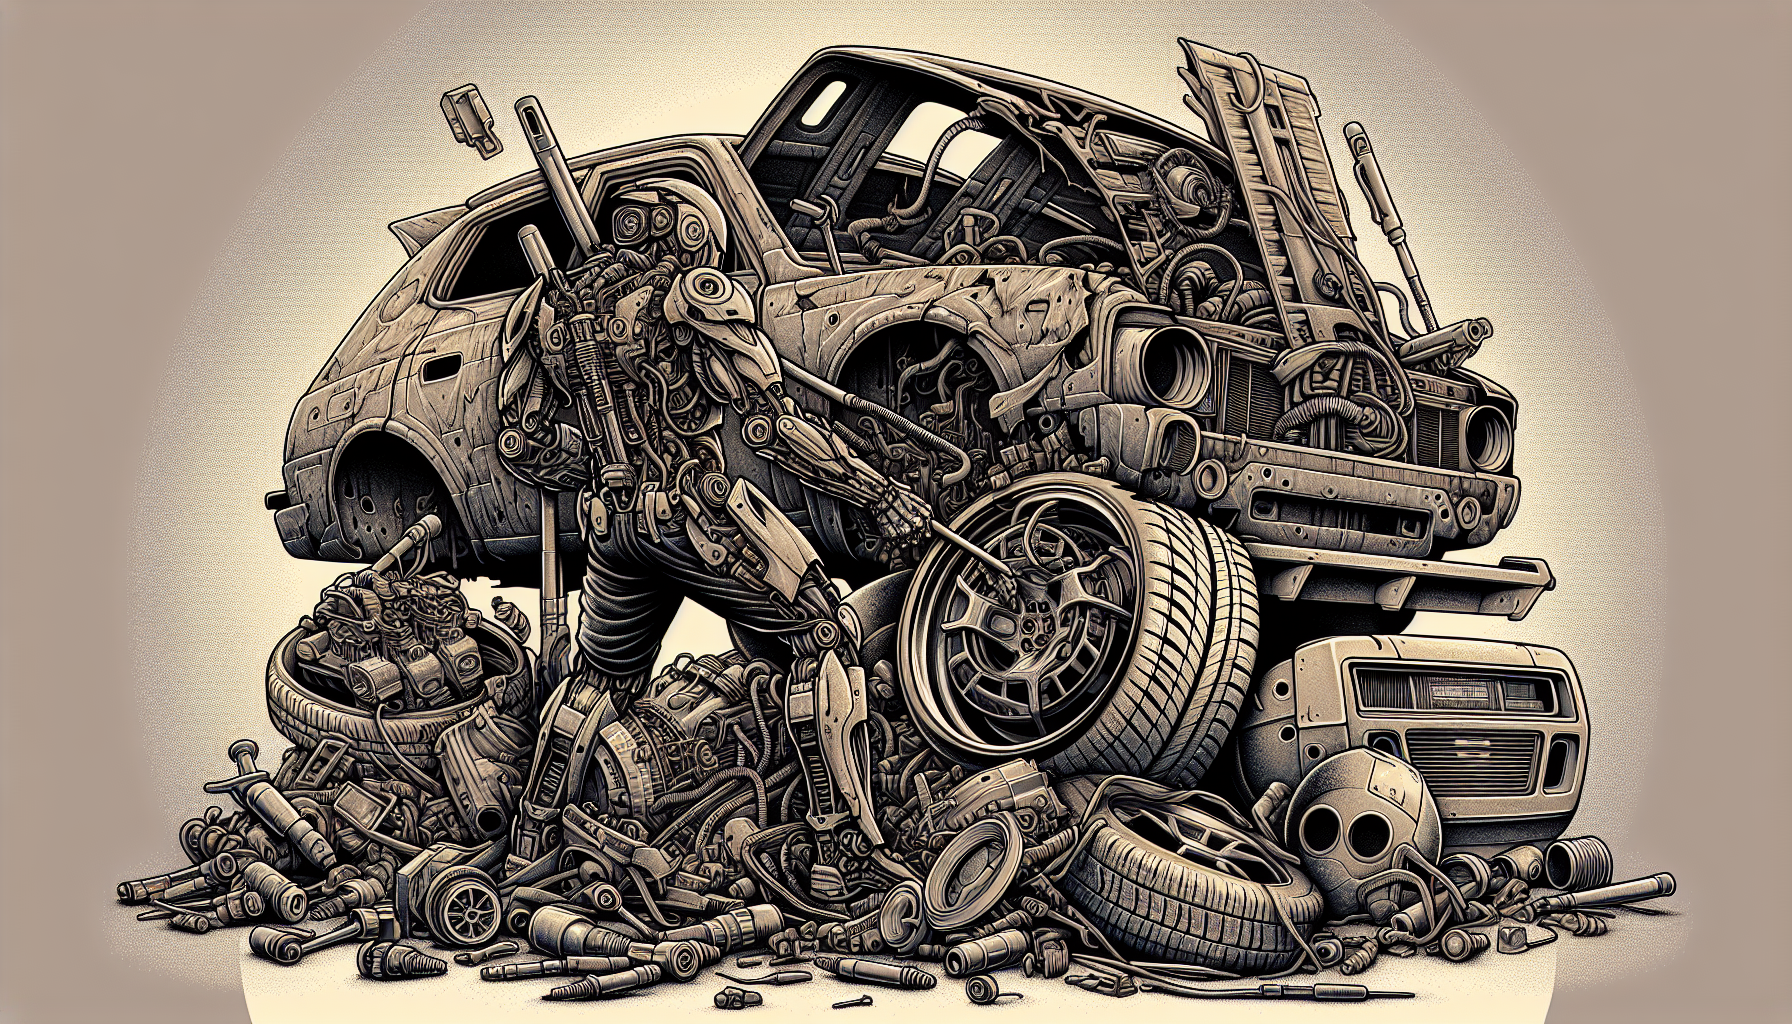 Illustration of a person removing valuable parts from a junk car